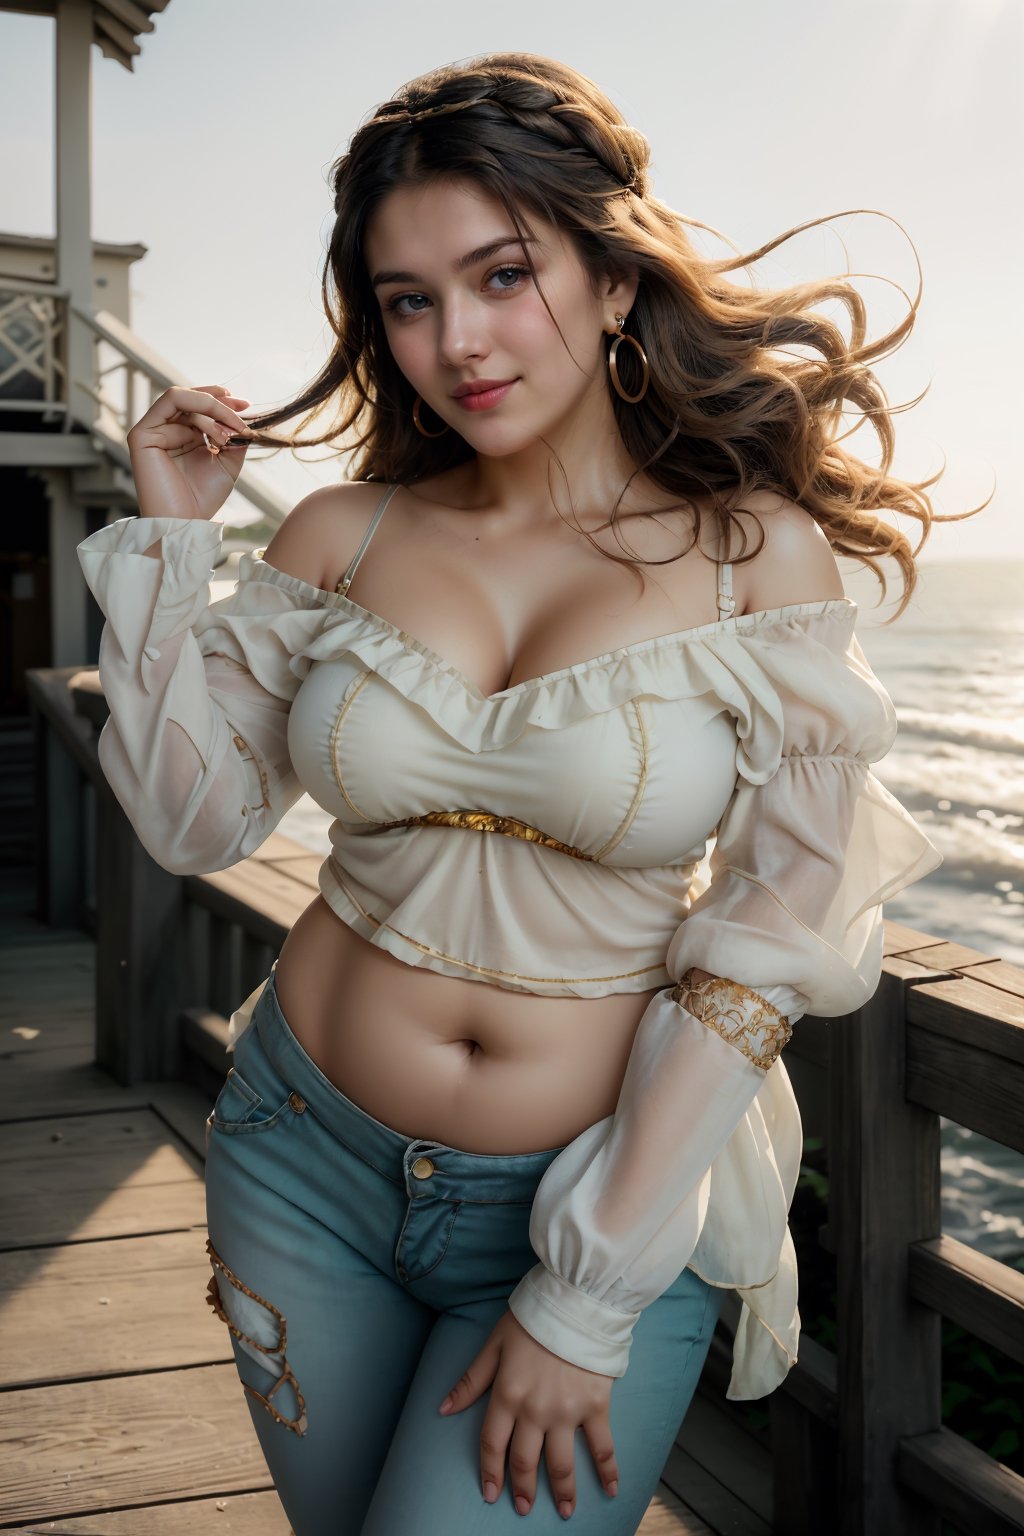 Extremely Realistic, A beautiful European woman, high quality, realistic, 25 years old of European girl plus size young Girl, chubby women, chubby face, thin waist, cute navel,

Hair Style: Loose, beachy waves with sun-kissed highlights.

Ornament: Adorned with a boho-inspired headband and hoop earrings.

Cloths: Casual yet stylish off-shoulder top paired with high-waisted jeans, epitomizing modern comfort.

Pose: Relaxed and carefree, with a genuine laughter captured in a candid moment.

Lighting: Soft, diffused natural light during a breezy afternoon, creating a flattering and easygoing atmosphere.

Background: Coastal boardwalk with a view of the sea, embodying a laid-back and joyful vibe.,photorealistic,1 girl,Masterpiece,Mallu 